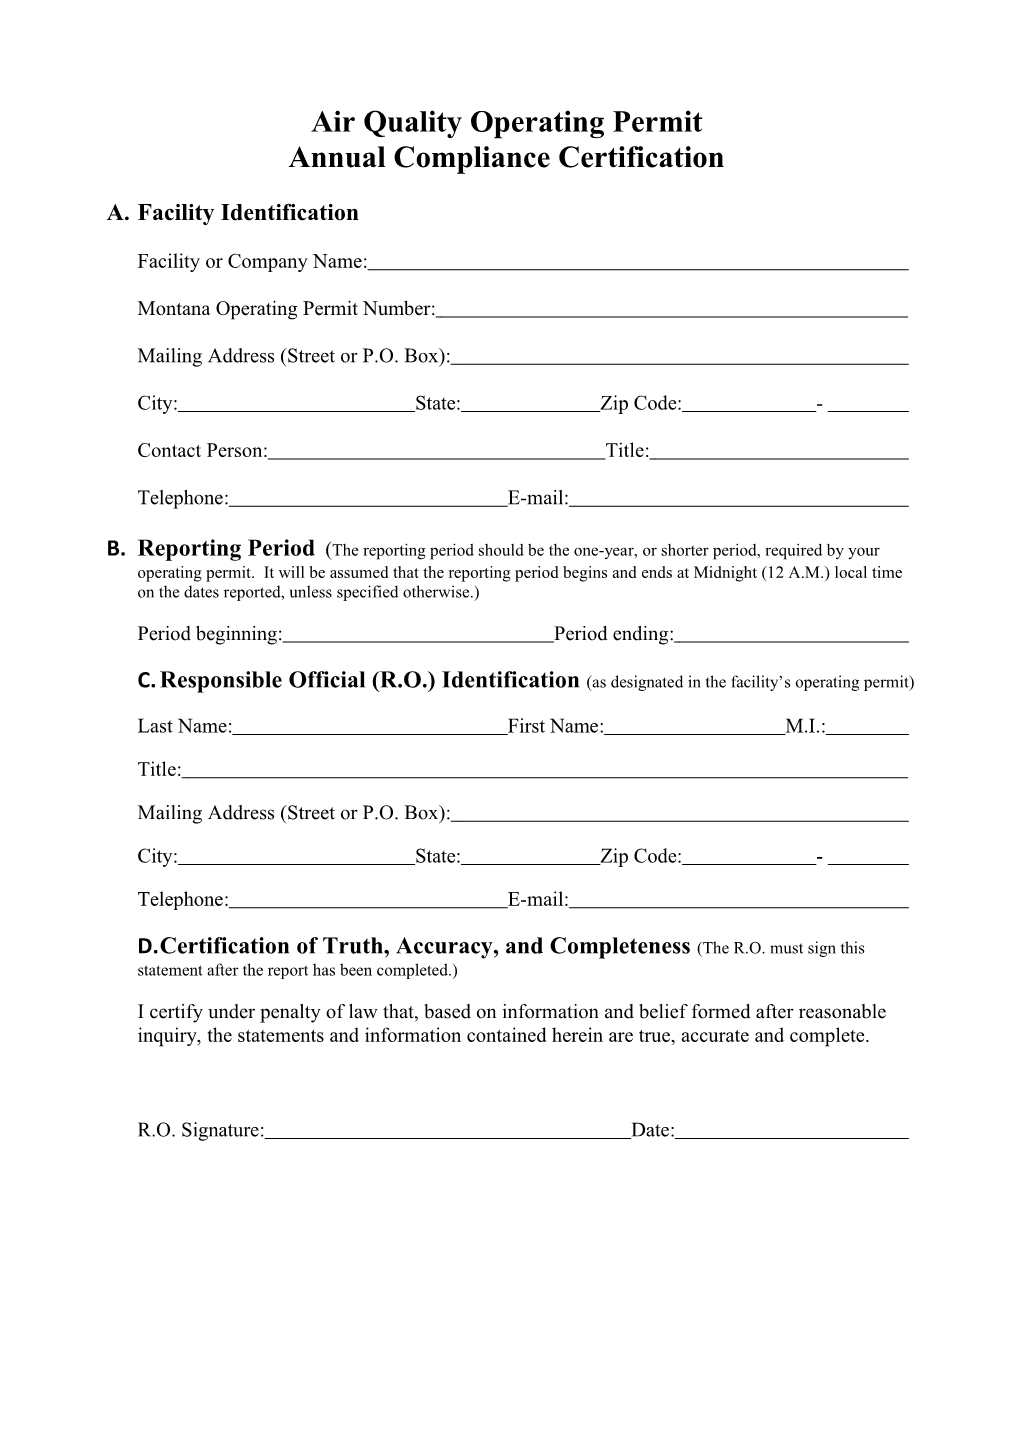 Air Quality Operating Permit